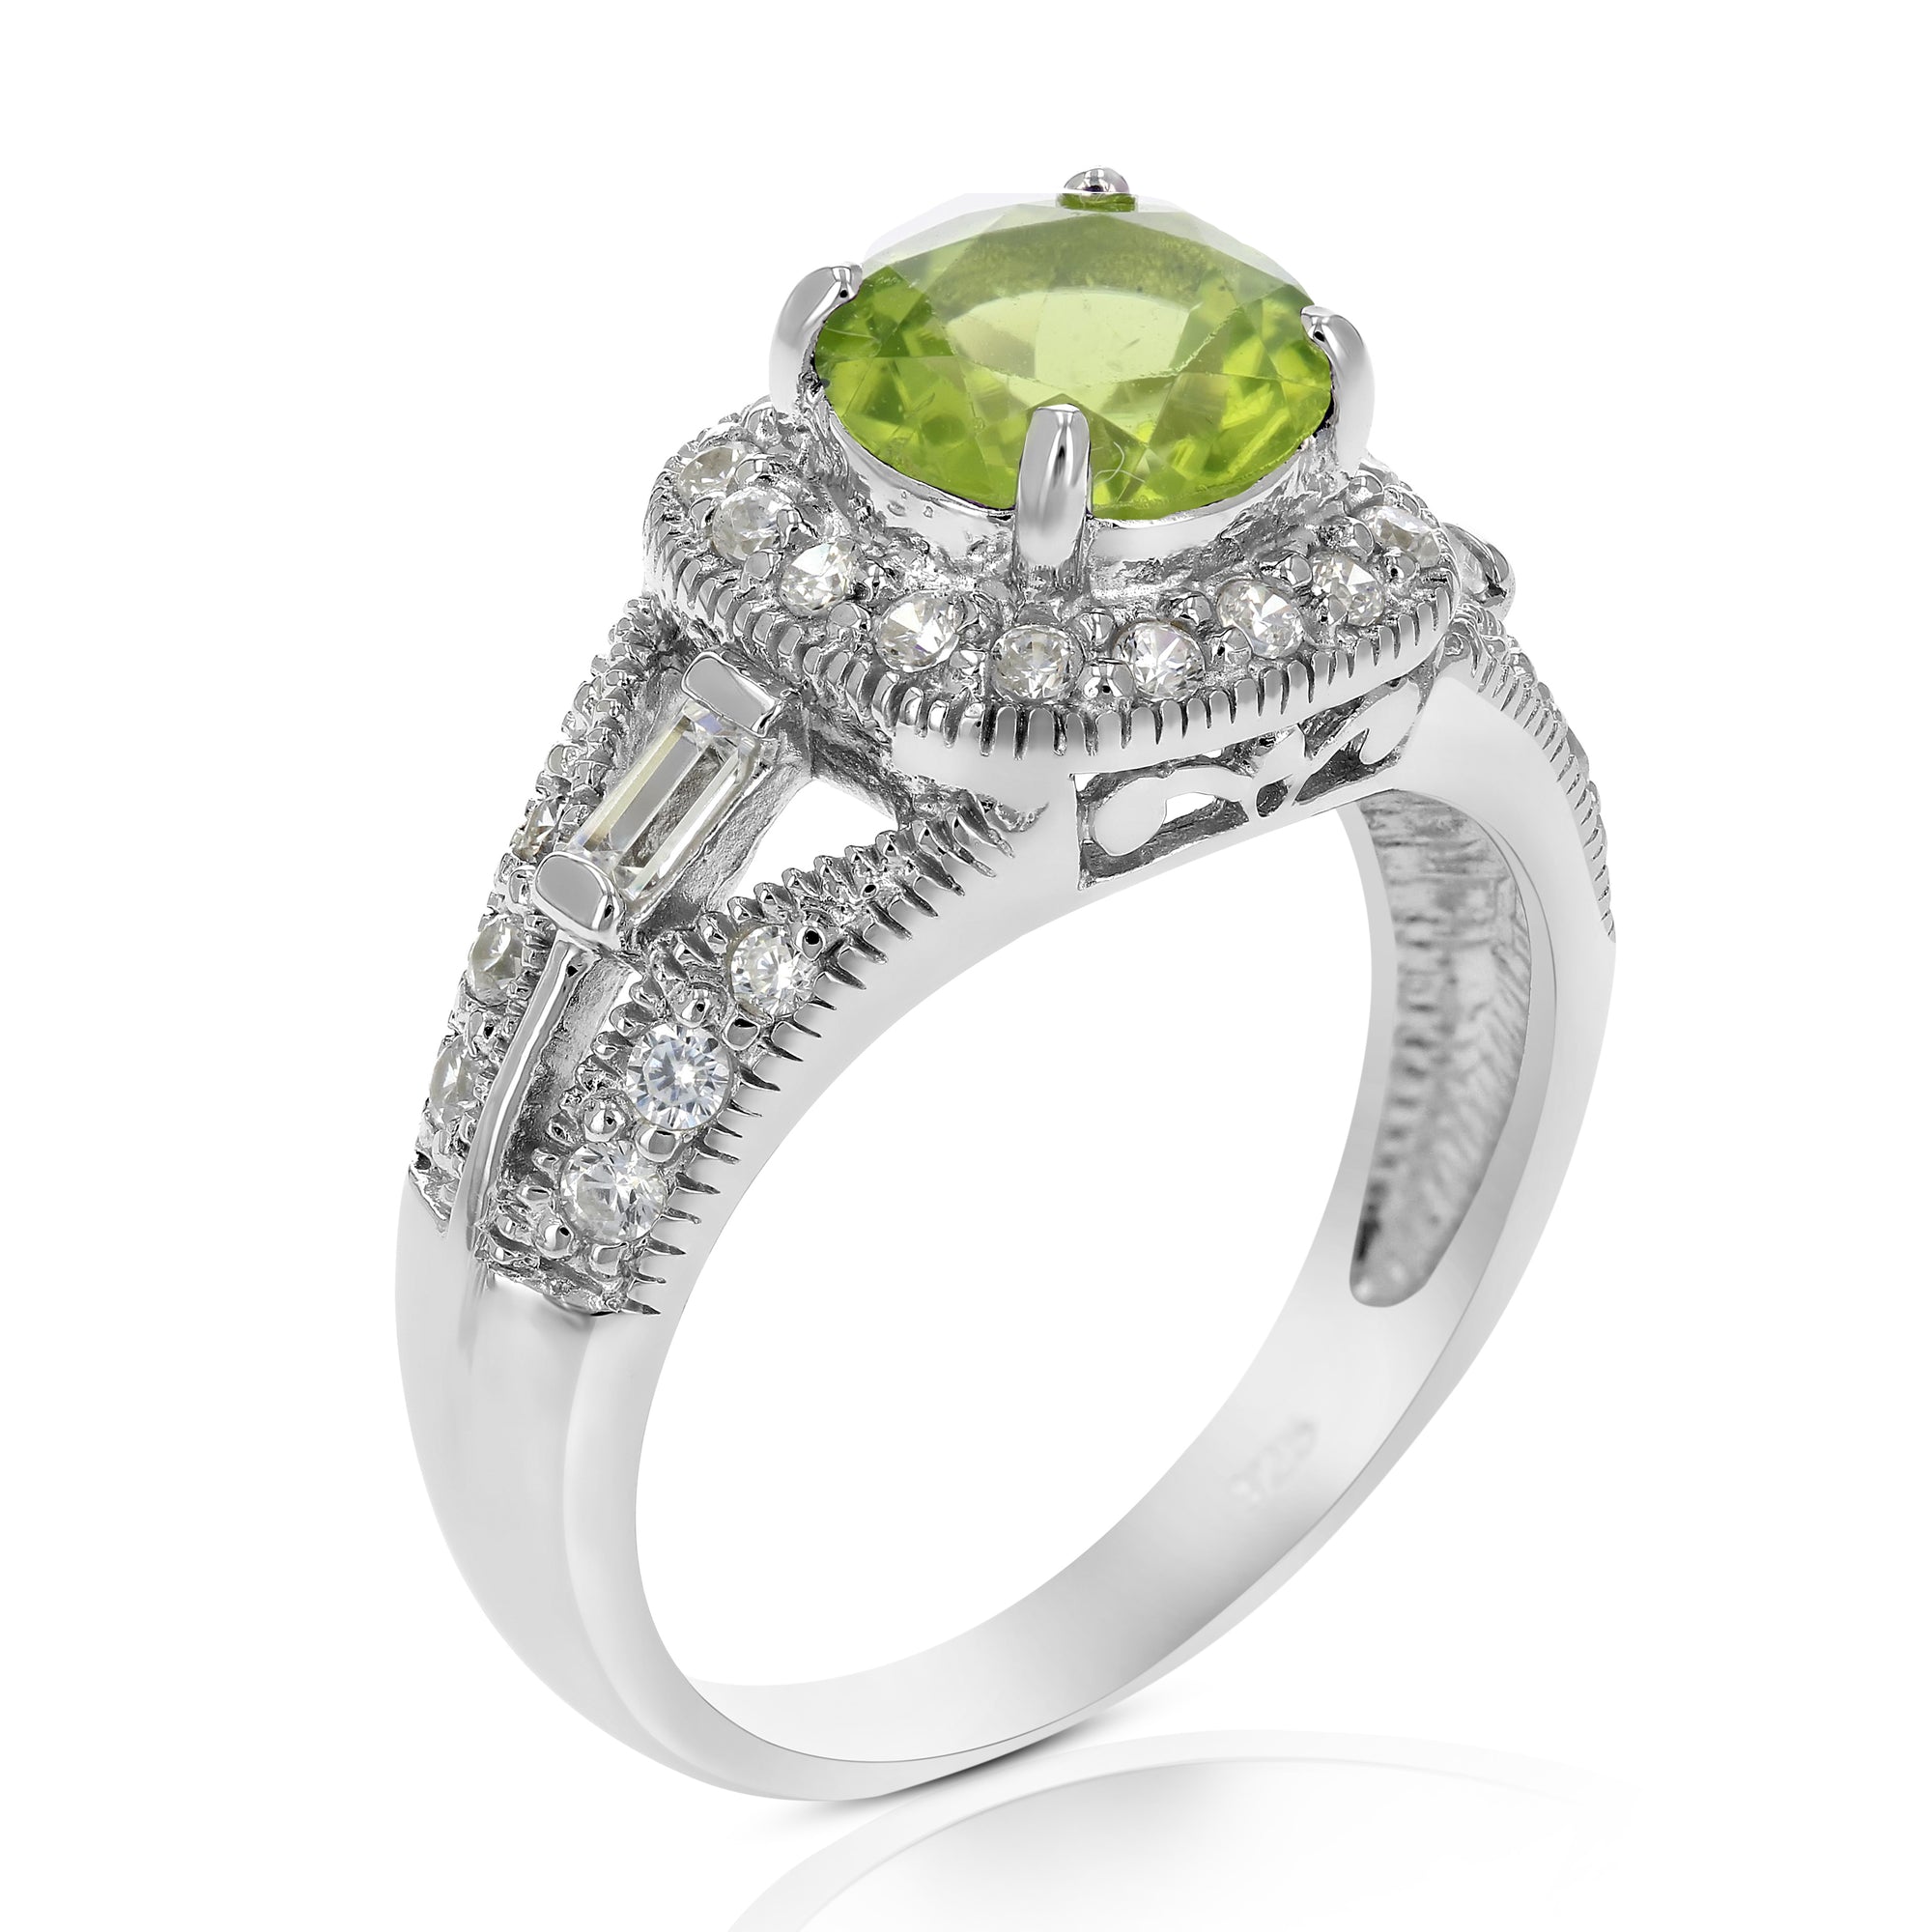 1 cttw Peridot Ring .925 Sterling Silver with Rhodium Plating Round Shape 7 MM